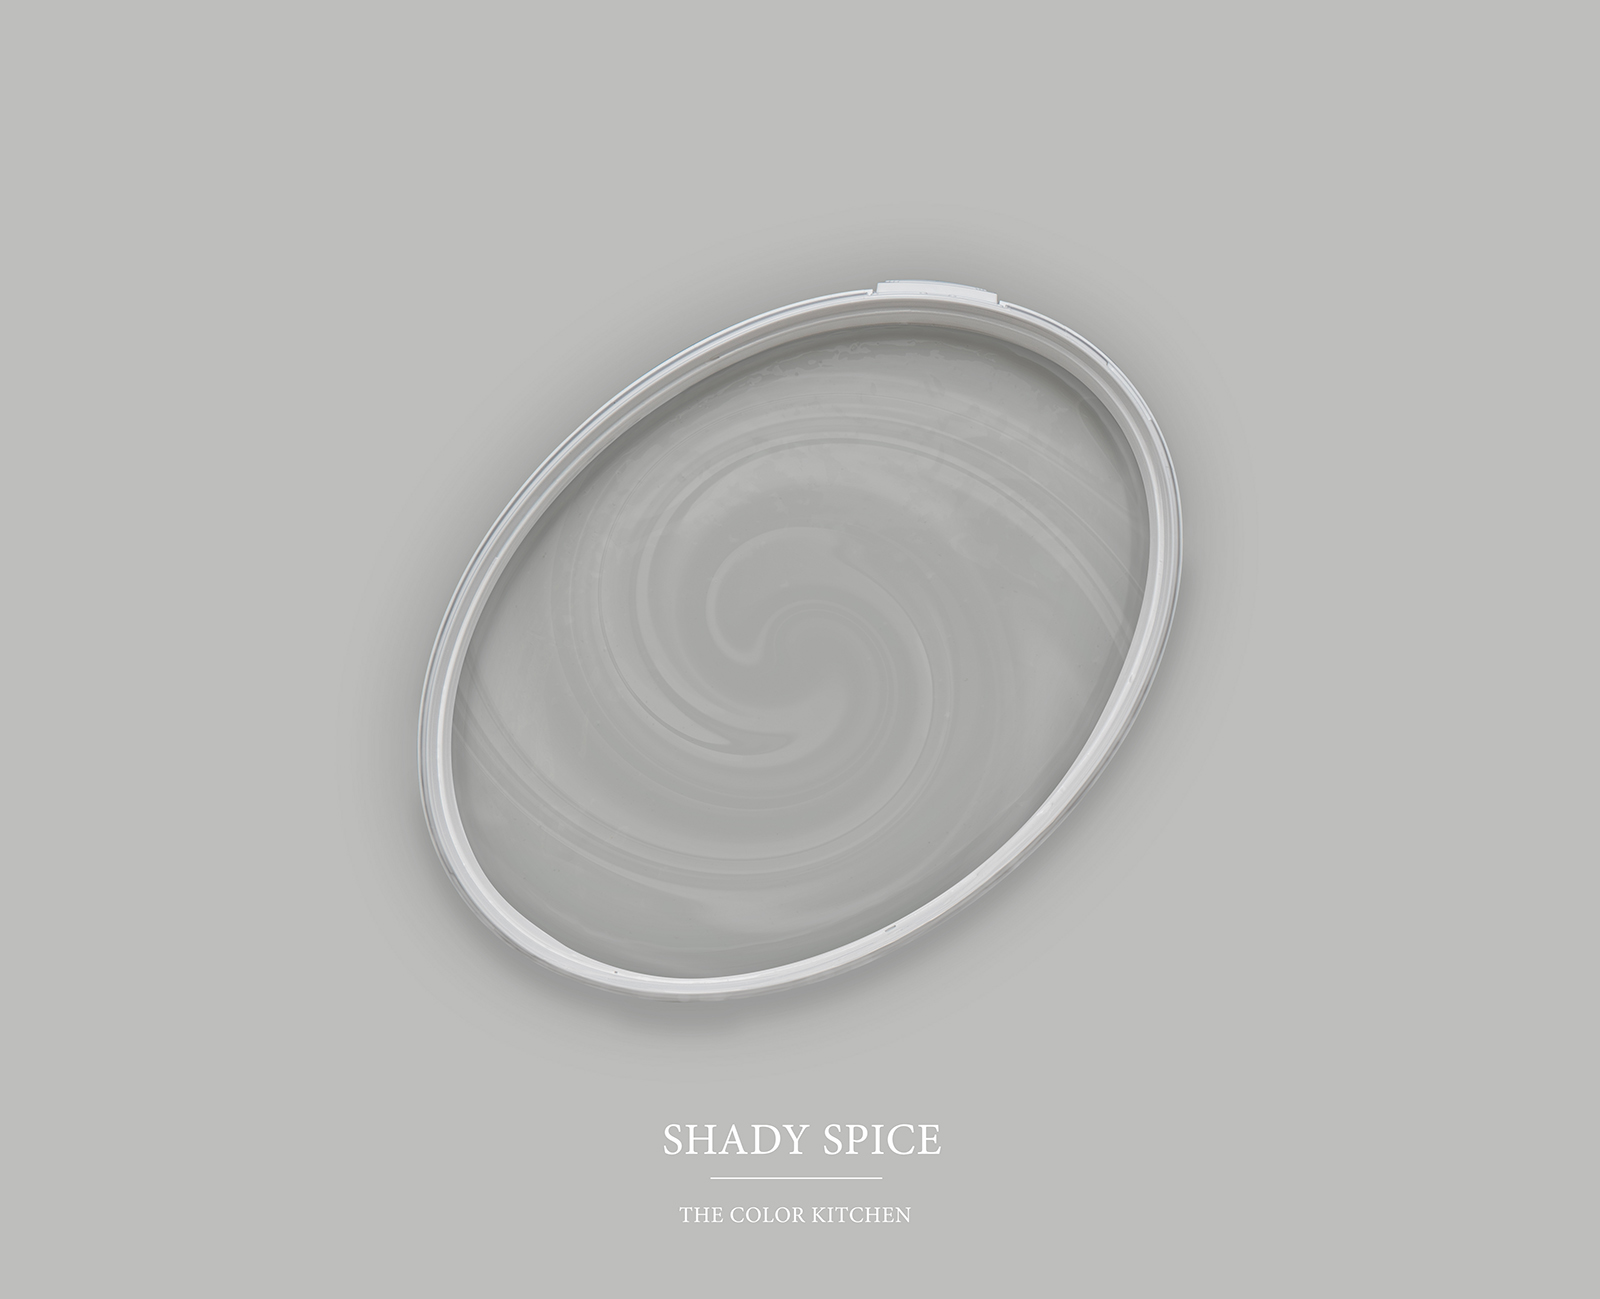 Wall Paint TCK1004 »Shady Spice« in cool grey – 5.0 litre
